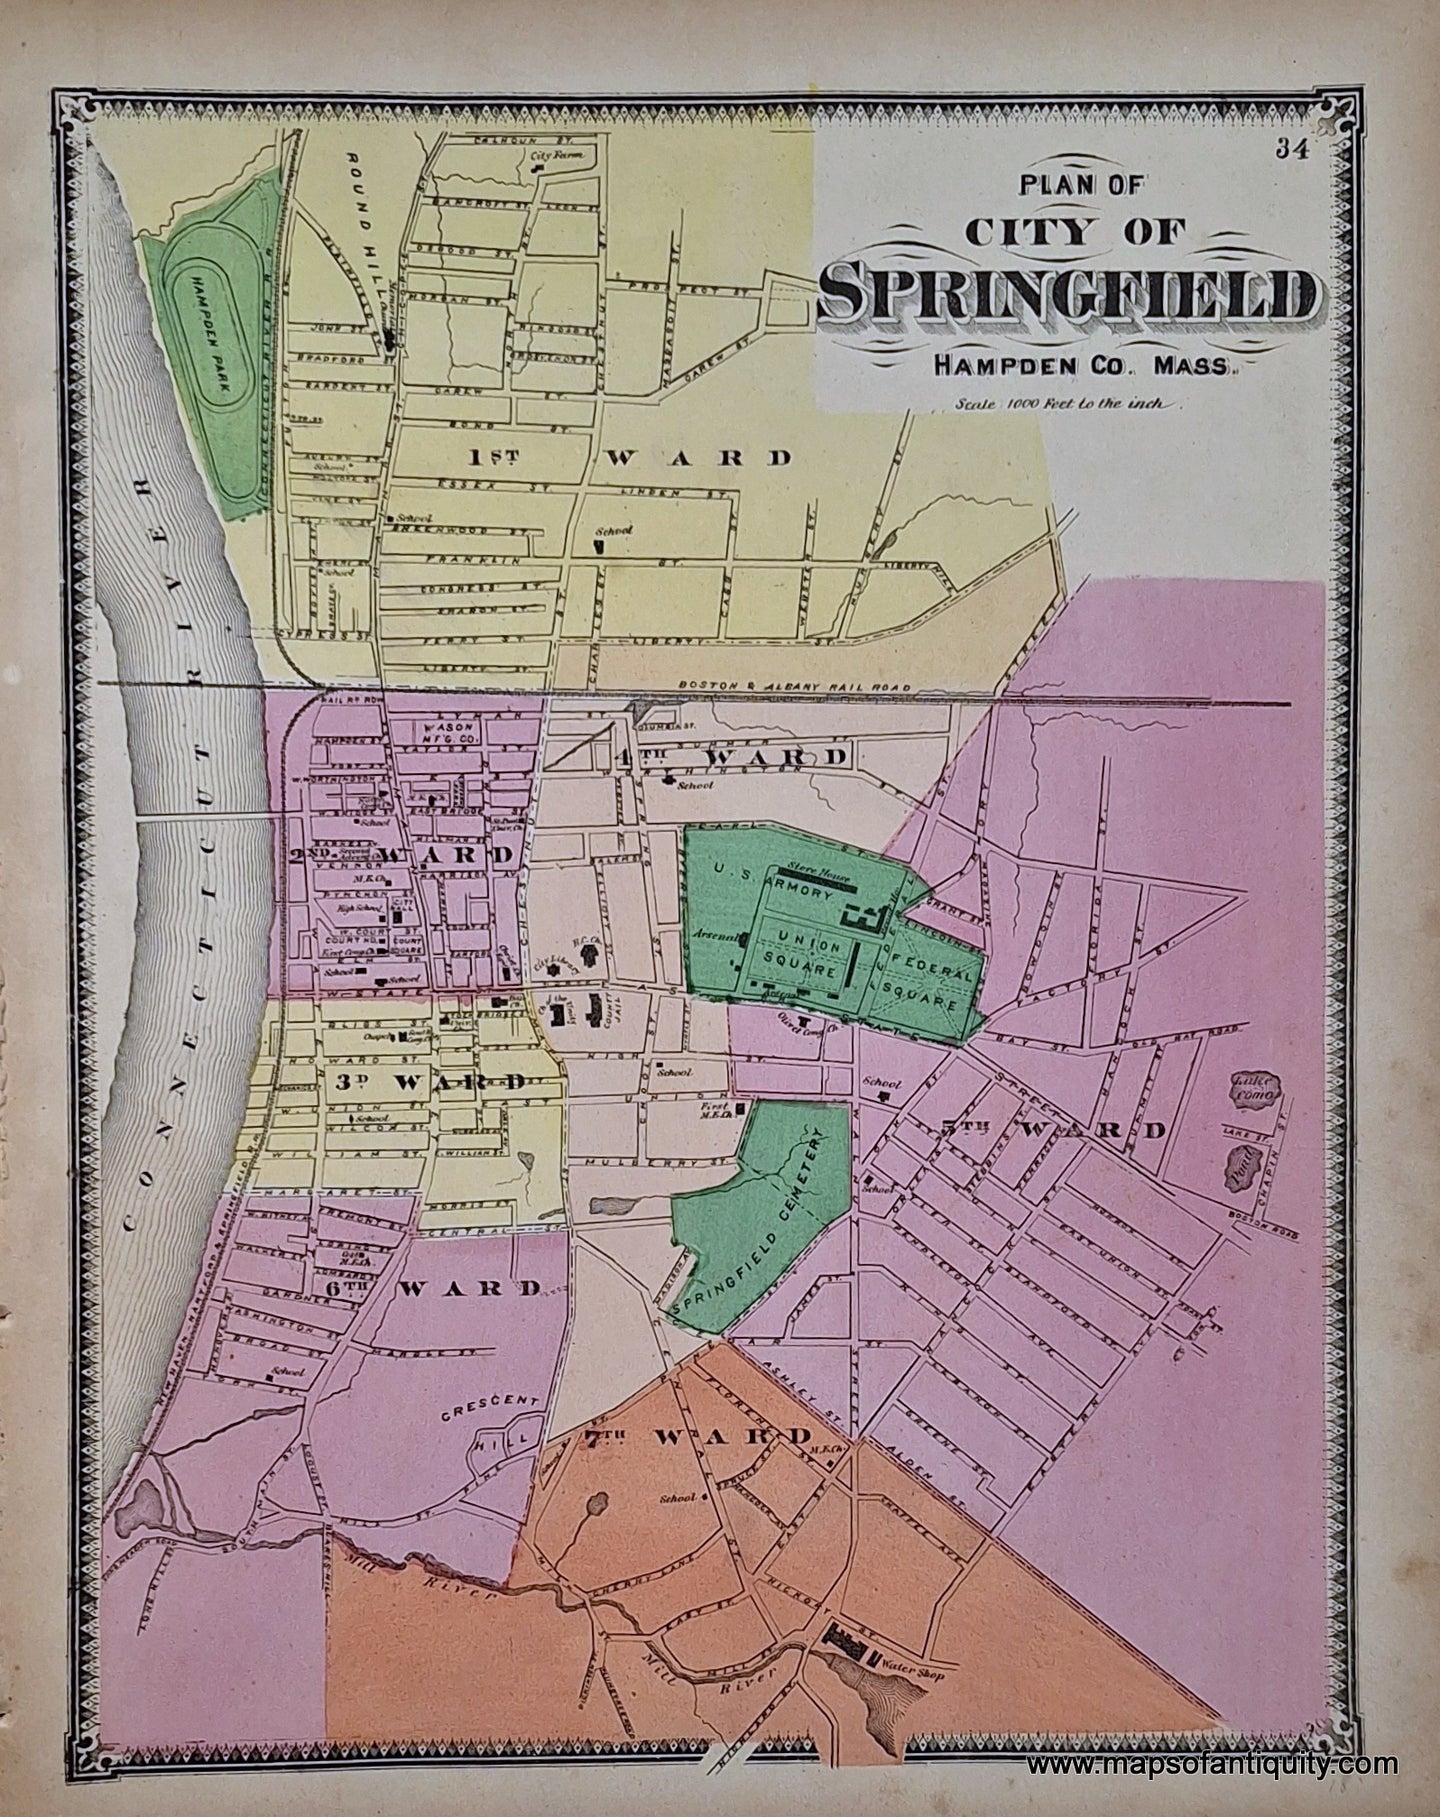 Antique-Hand-Colored-Map-Plan-of-City-of-Springfield-p.-34-(MA)-Massachusetts-Hampden-County-1870-Beers-Ellis-and-Soule-Maps-Of-Antiquity